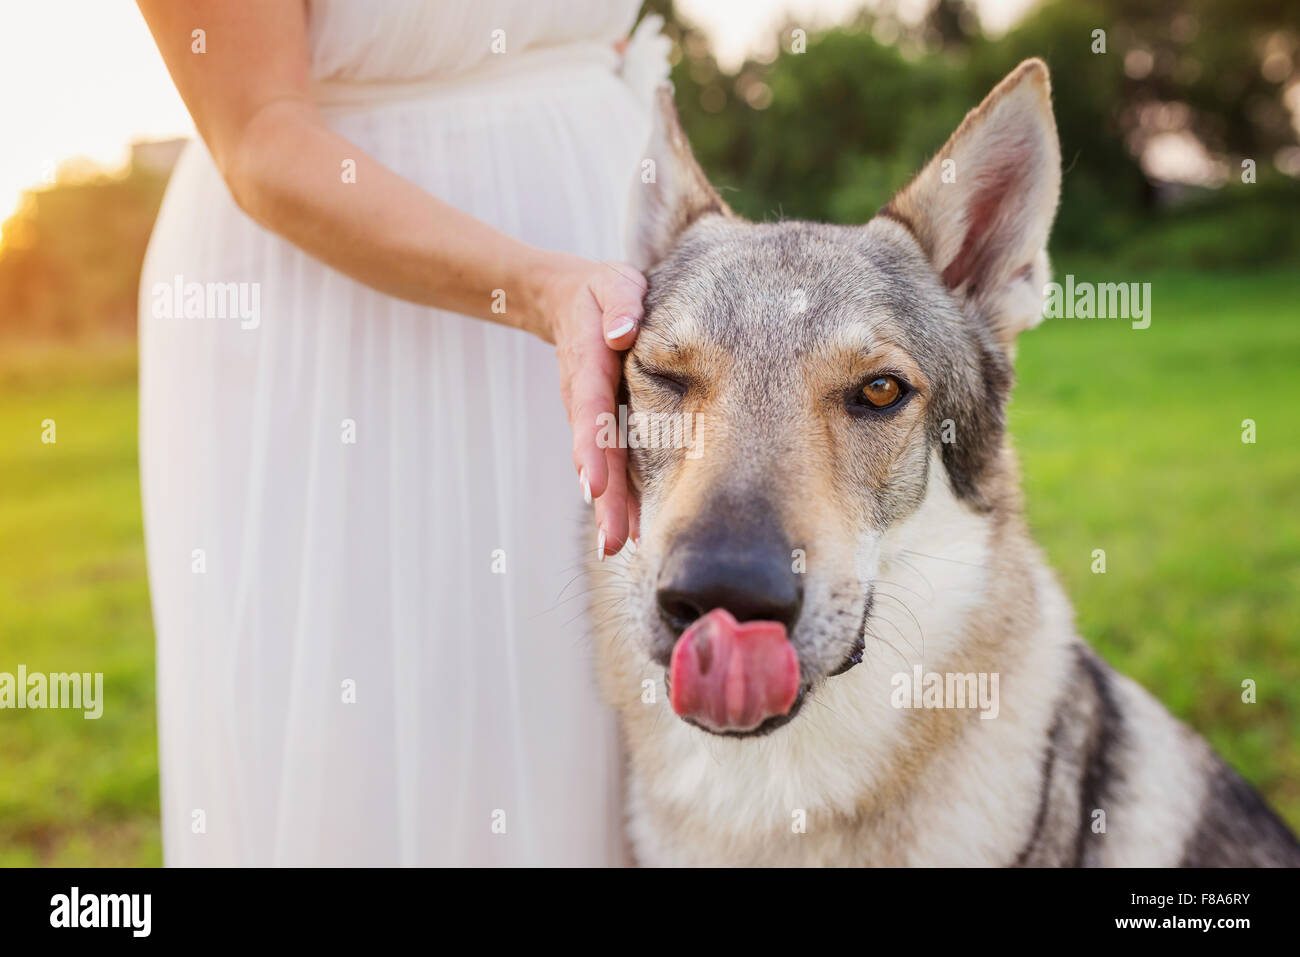 Woman with dog Stock Photo